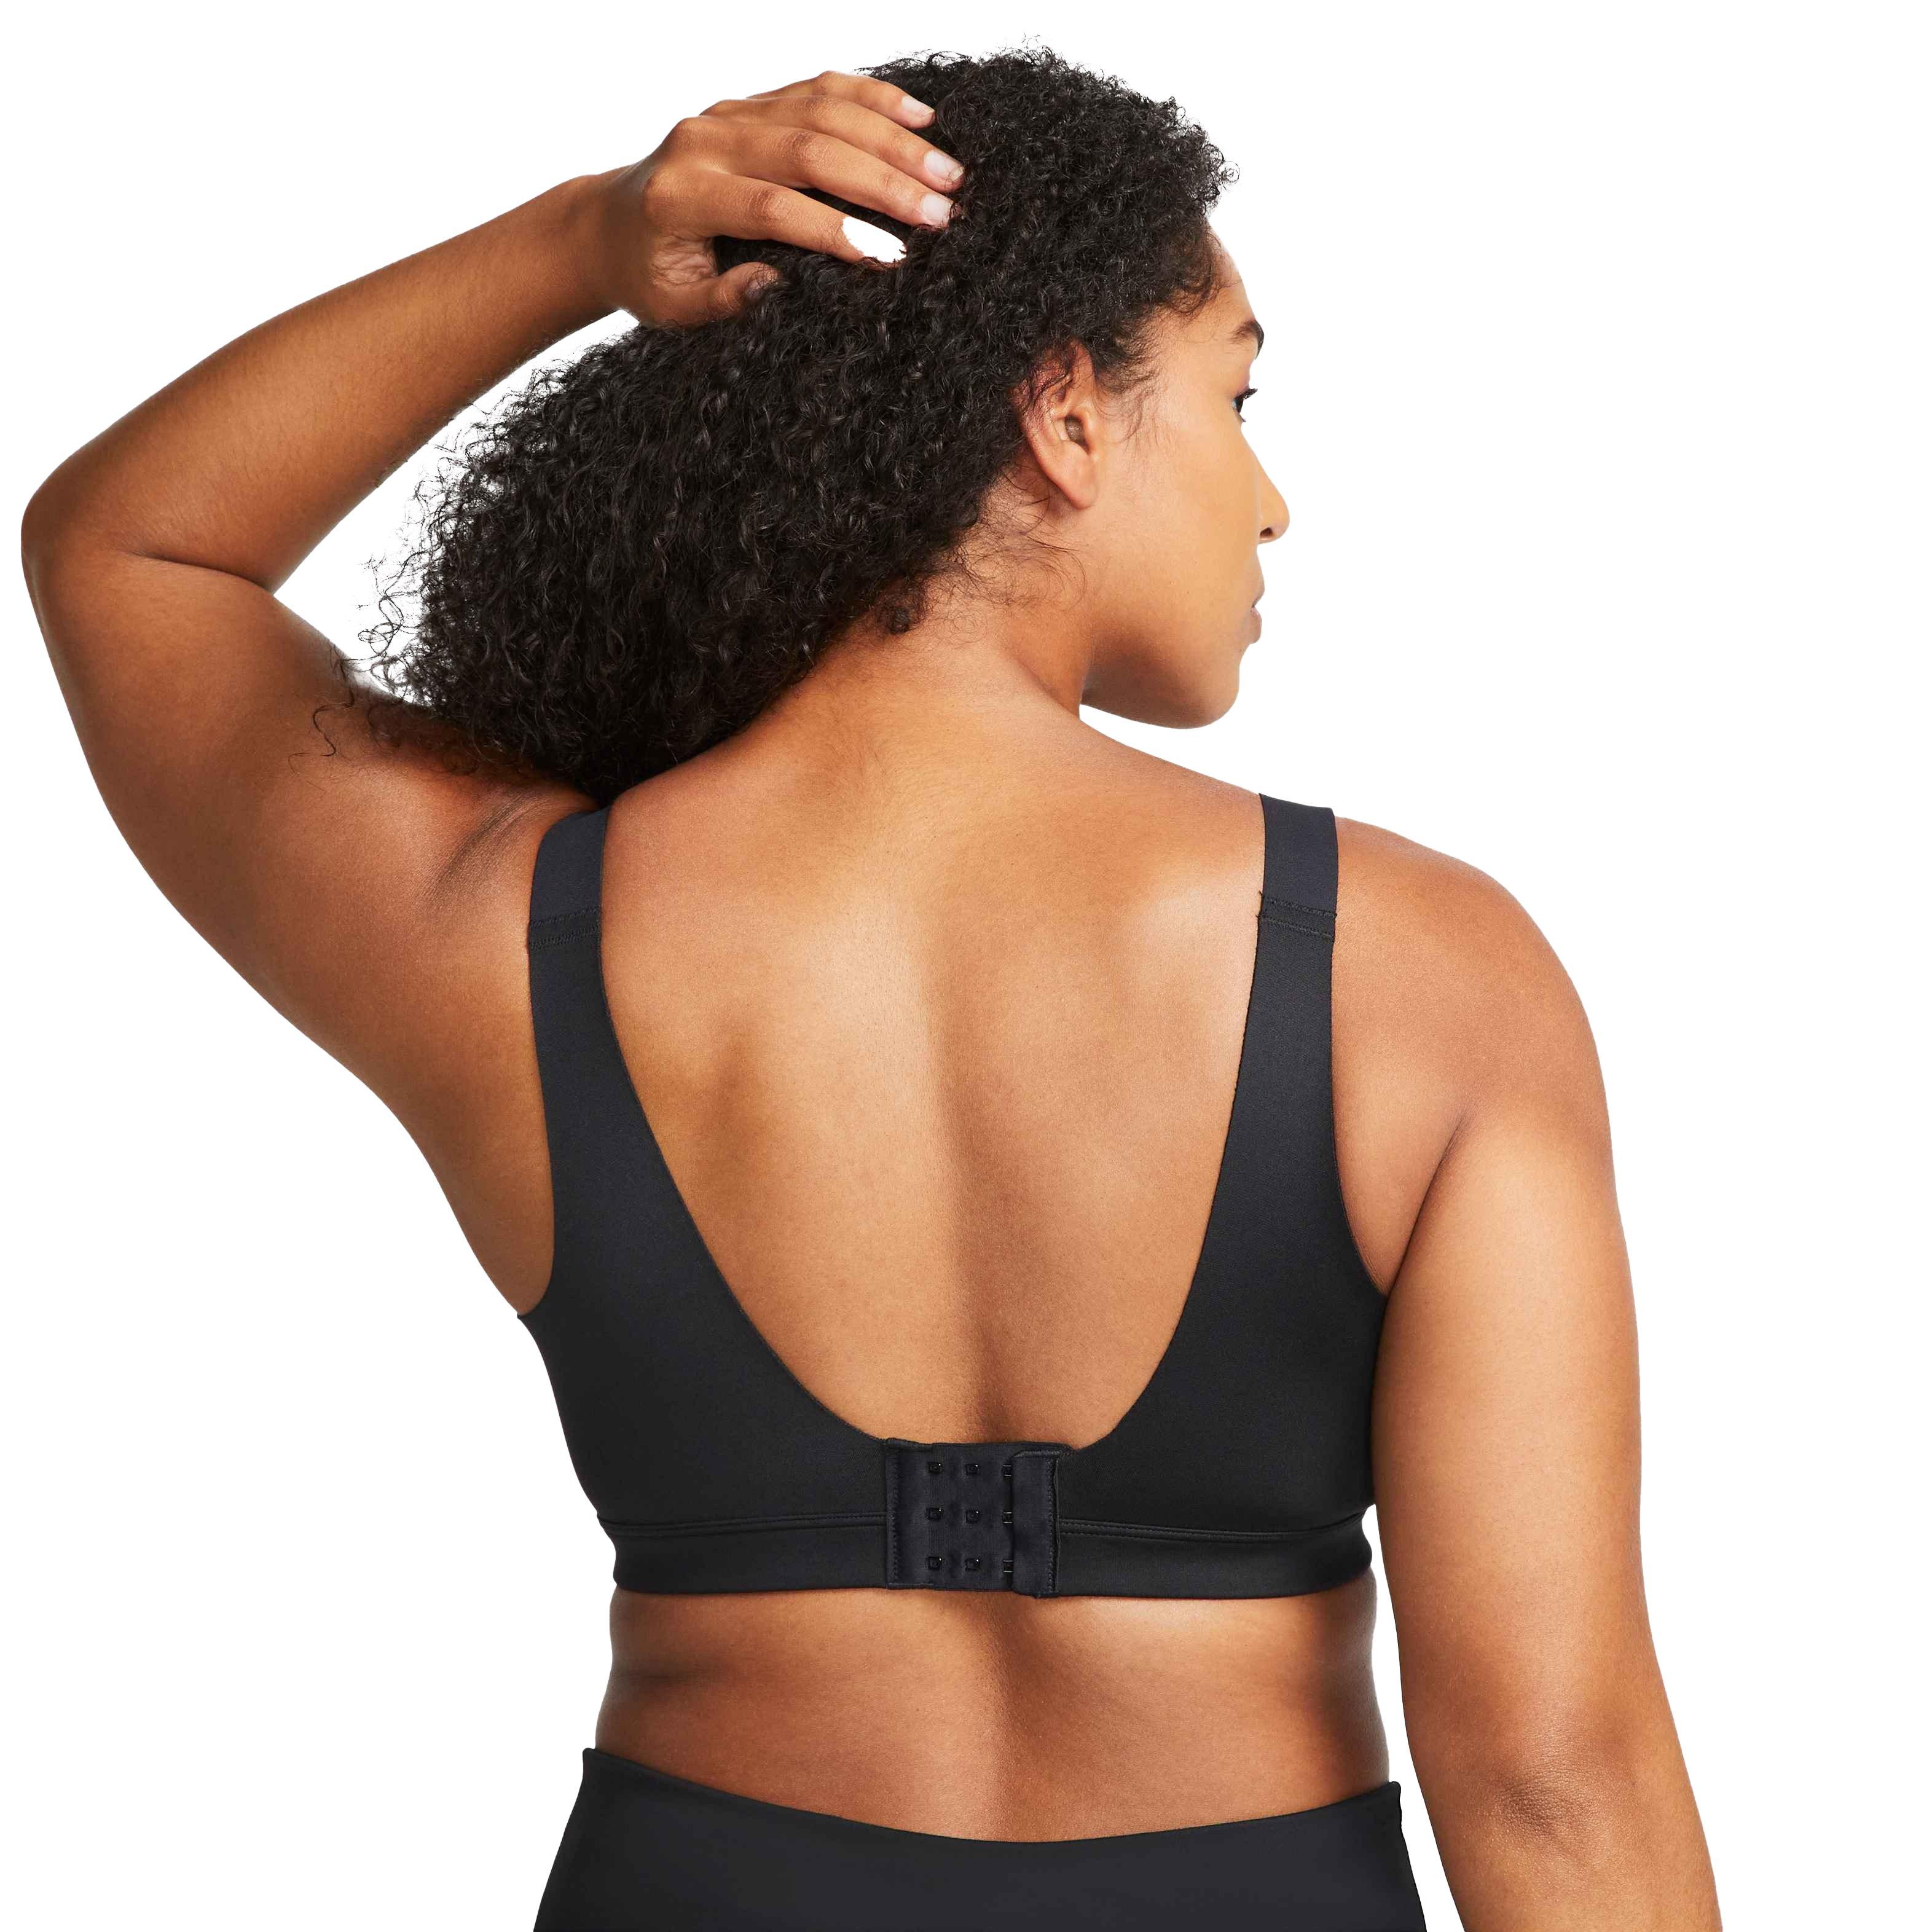 Nike Alpha High-Support Padded Adjustable Sports Bra Black This bra gives  you our highest level of support with a compressive feel and minimal bounce  for a secure fit. Engineered foam pads provide